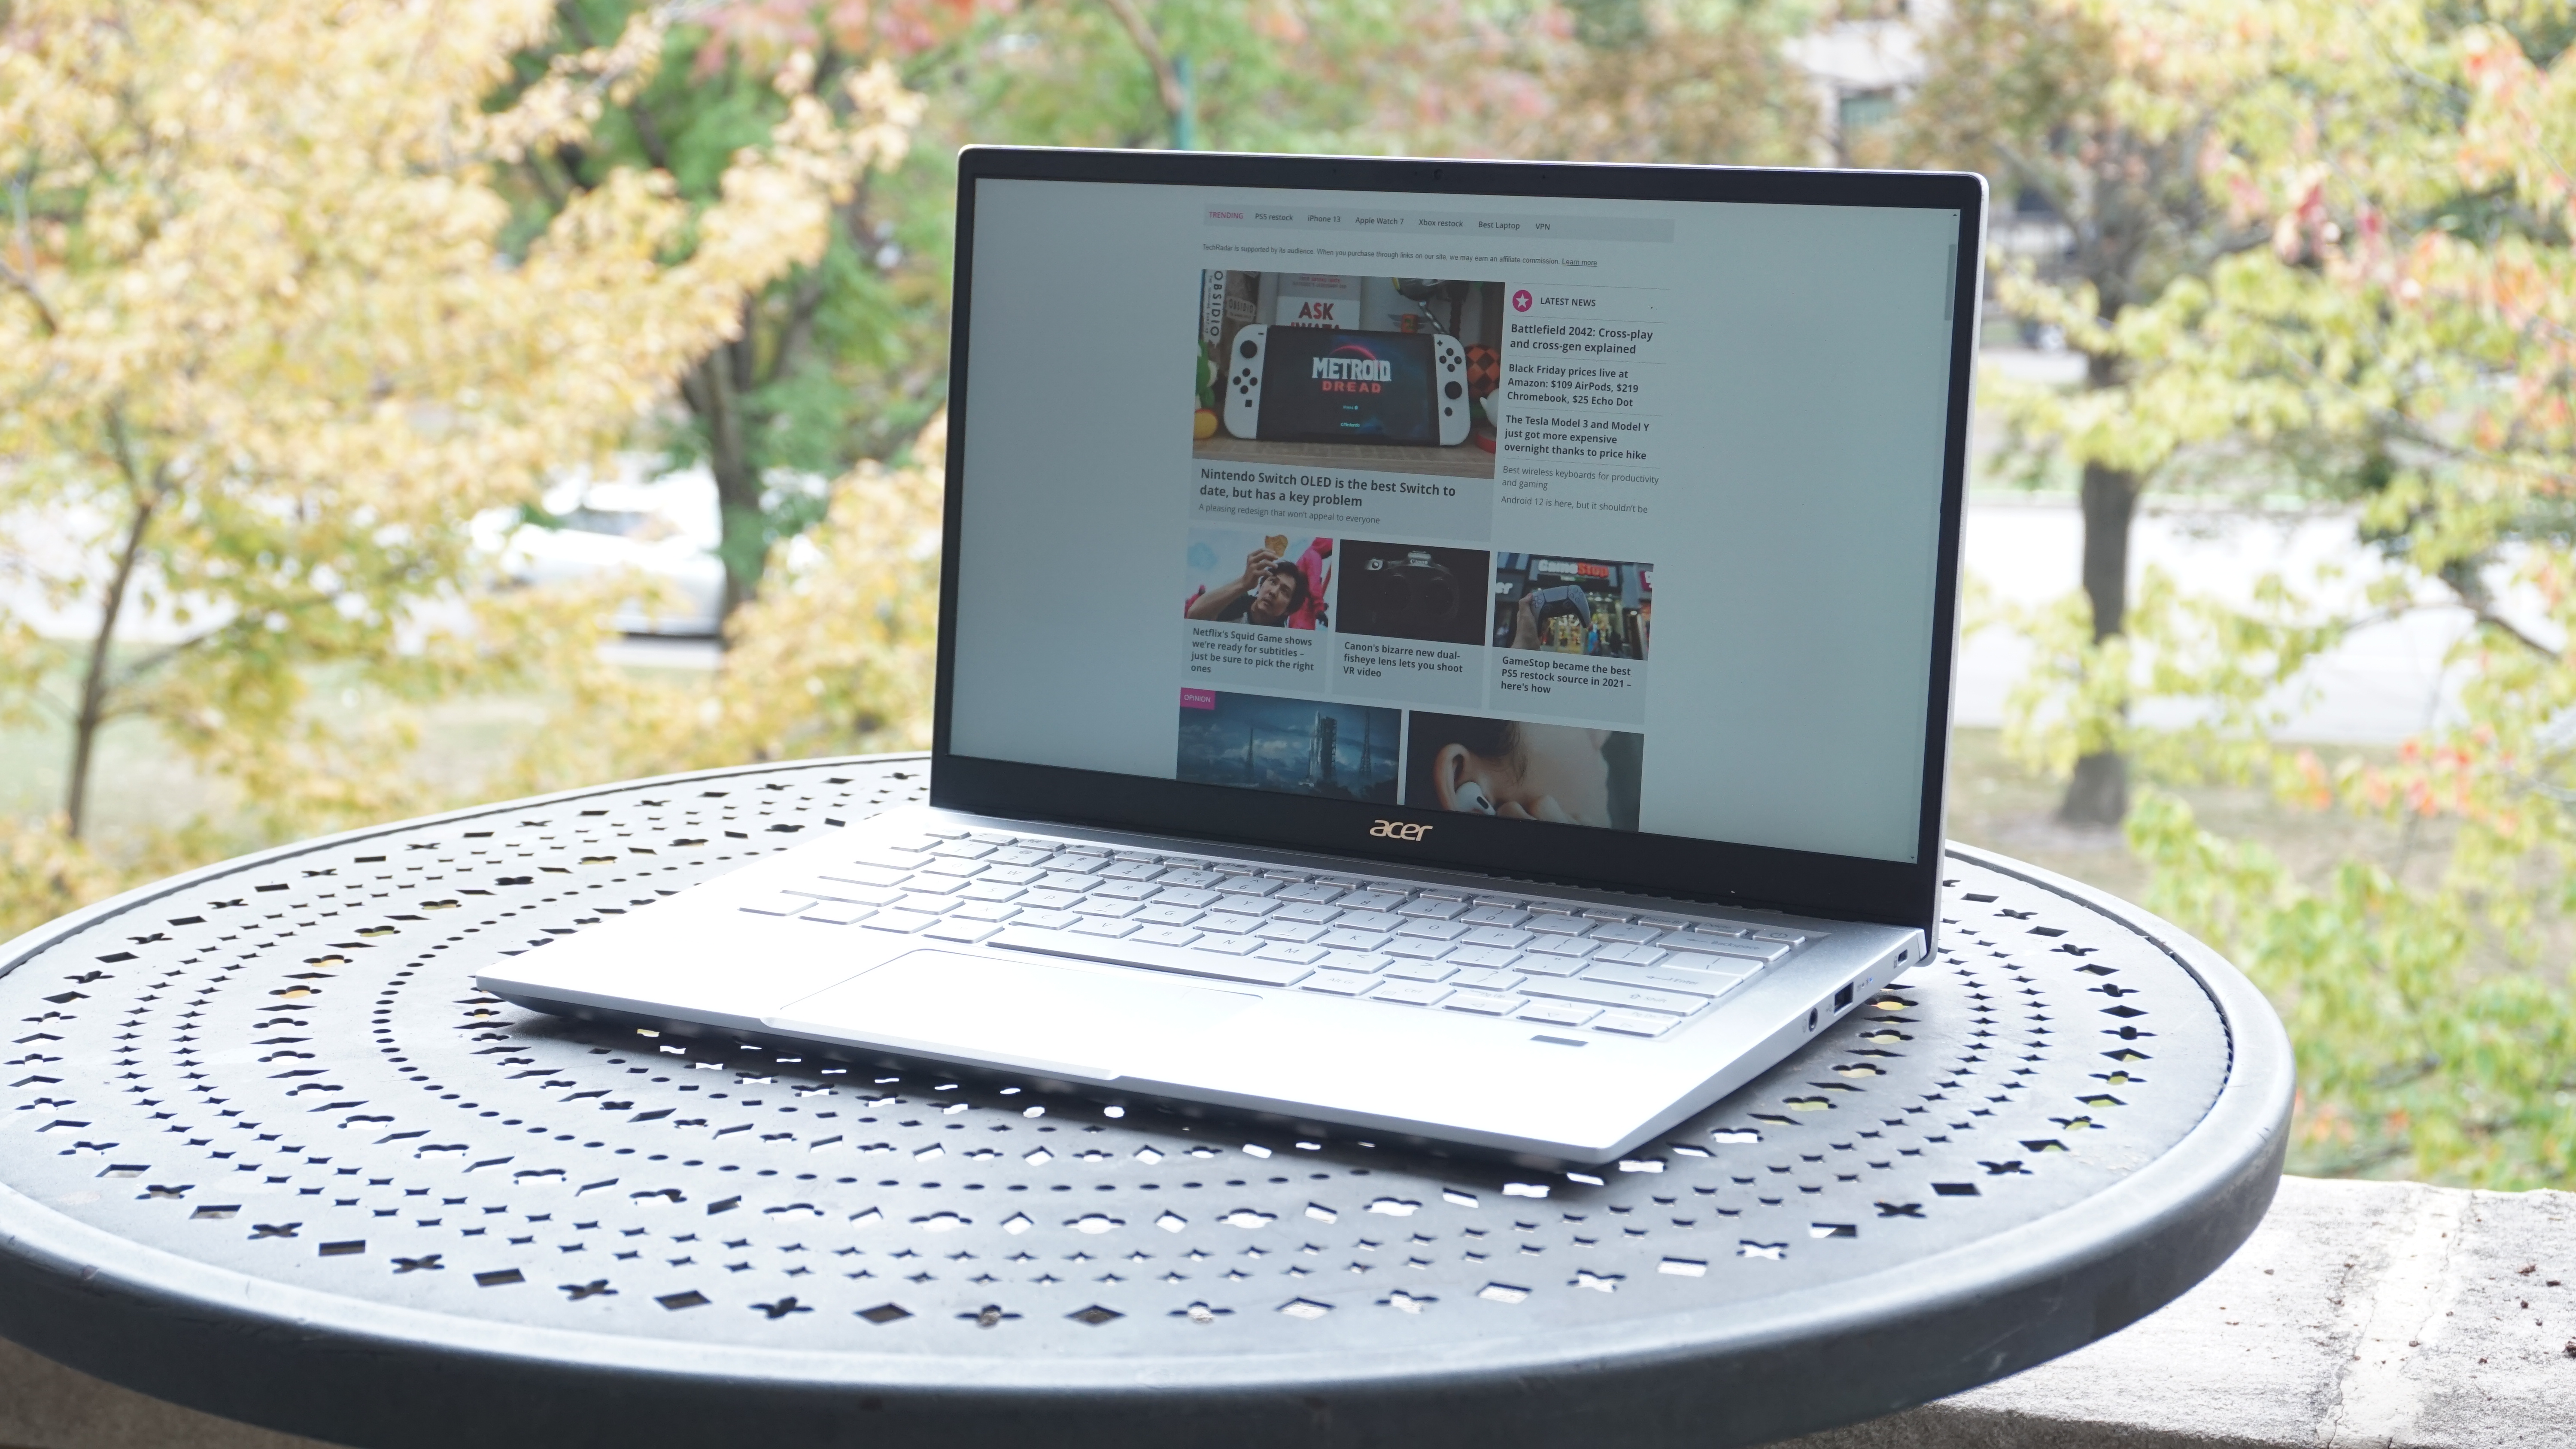 Acer Swift 3 Laptop Review (2021): Affordable and All-Purpose